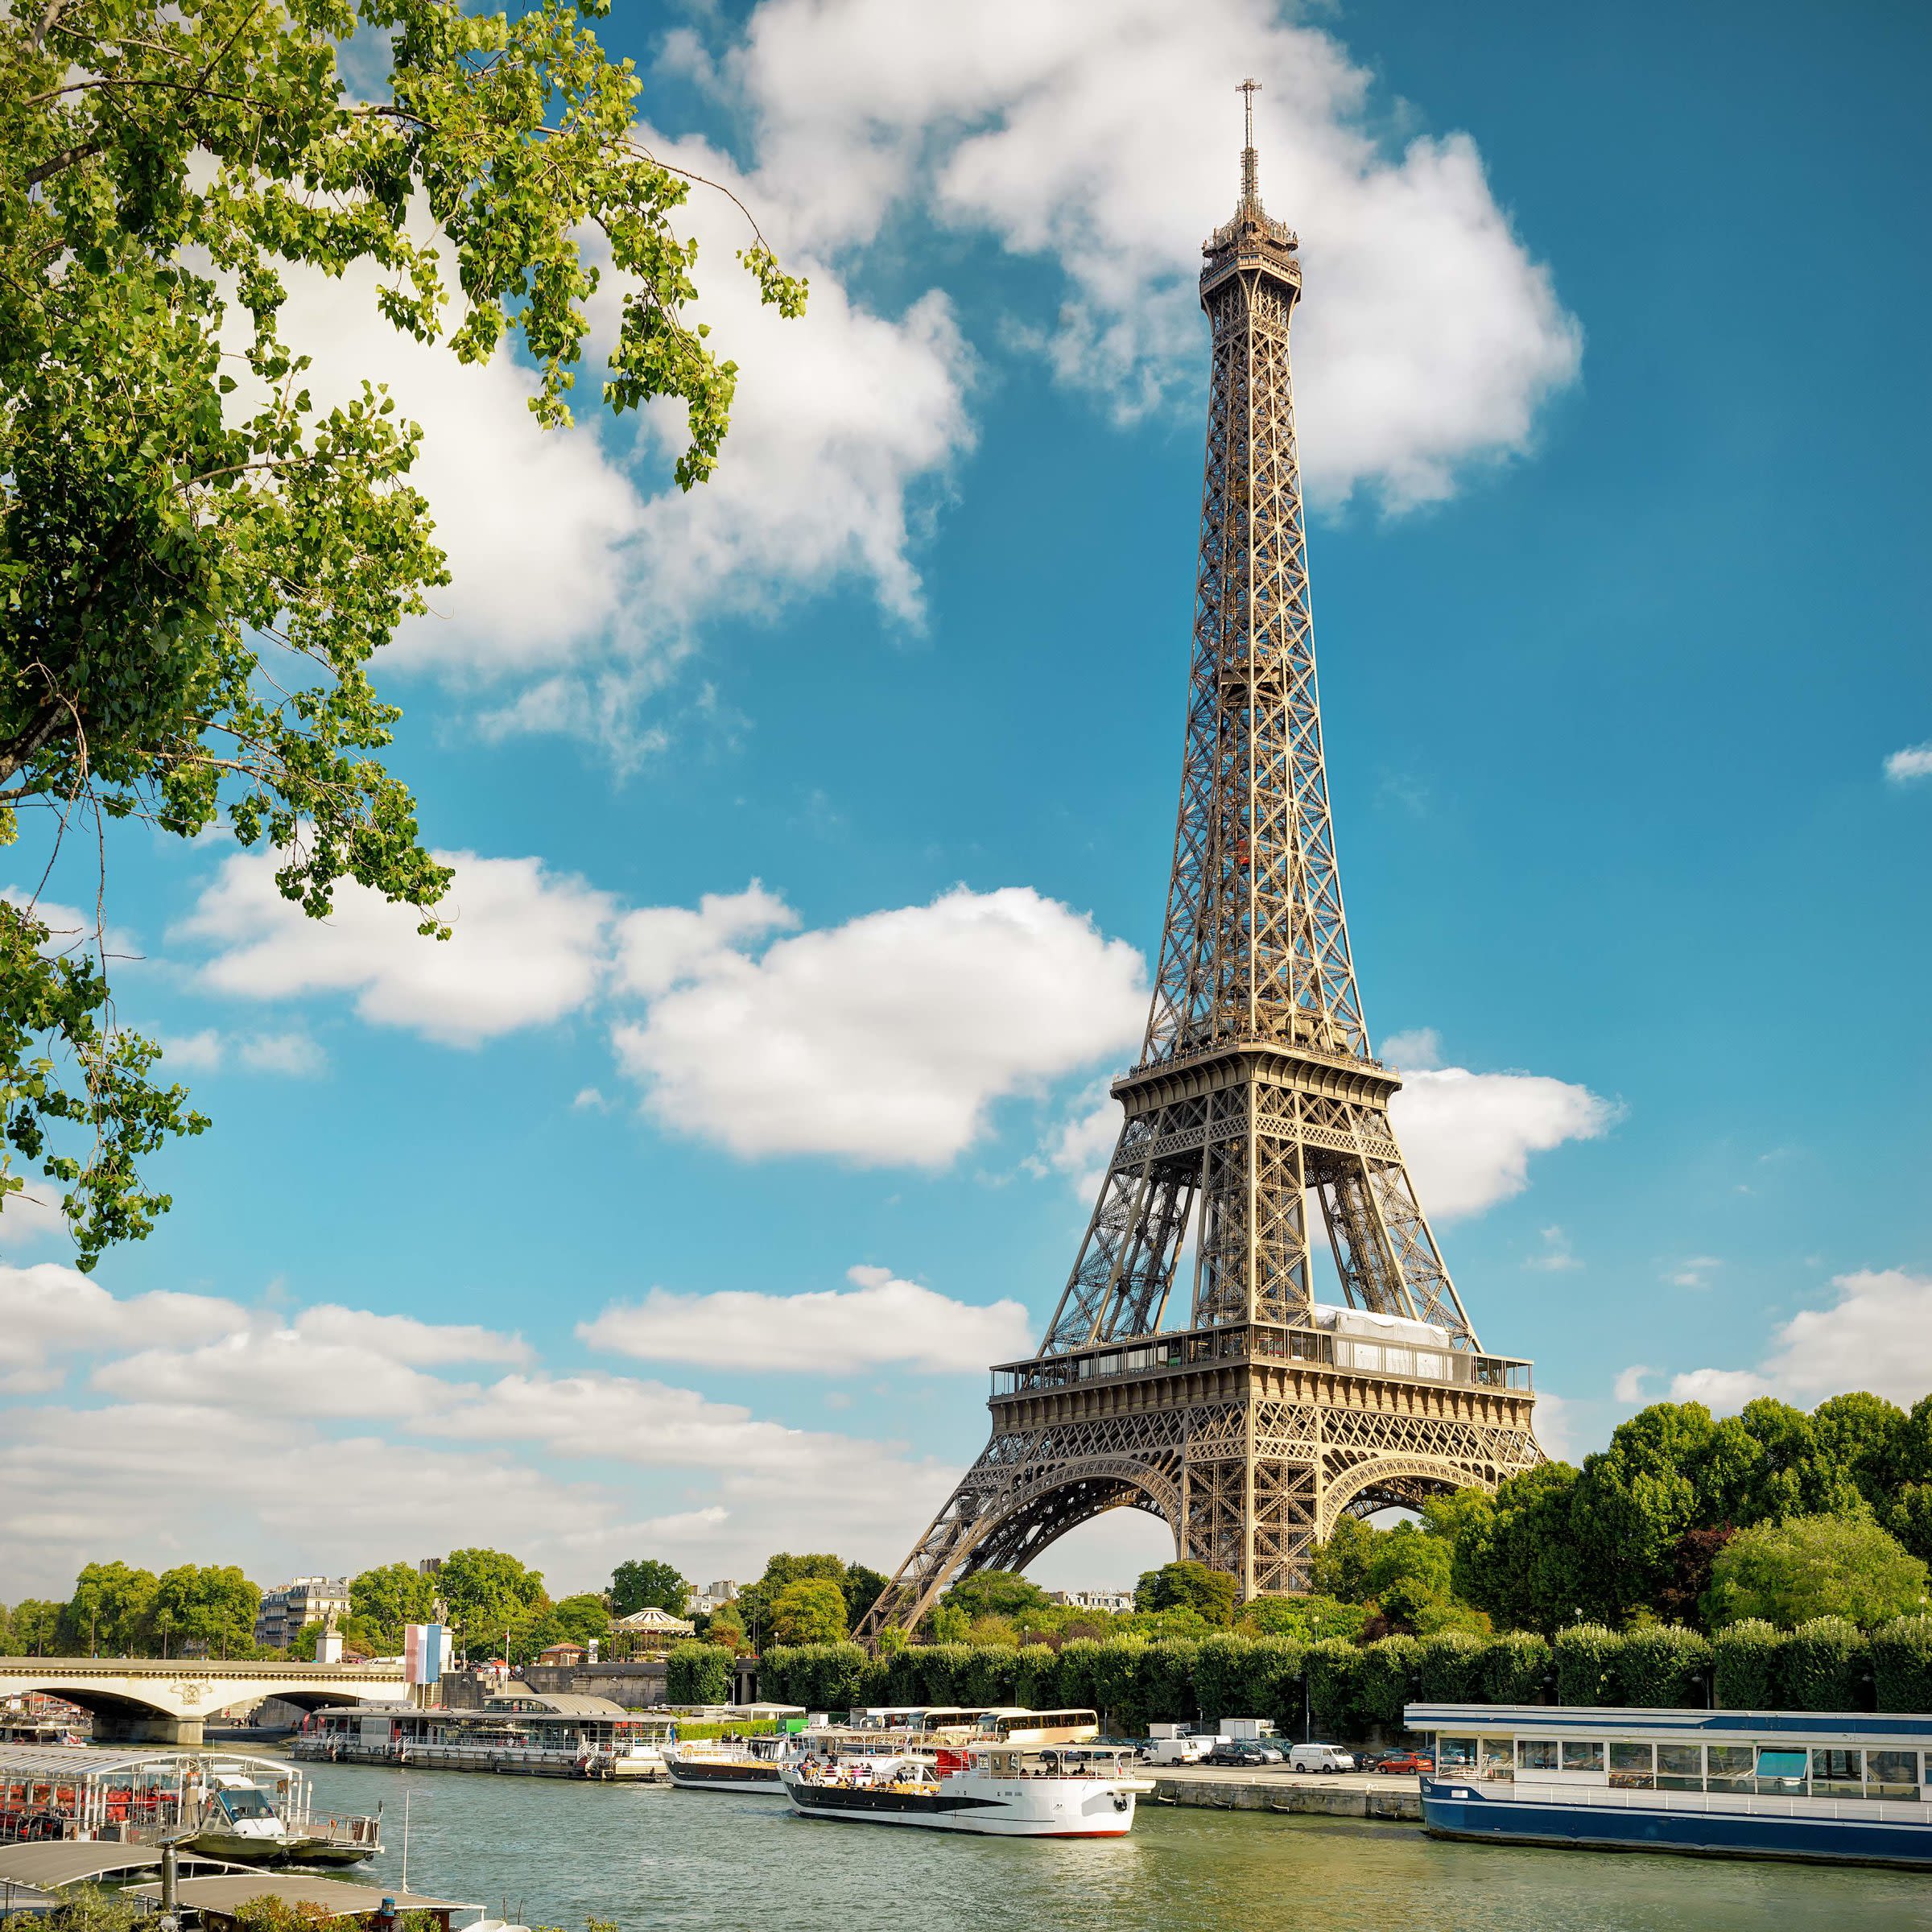 Family special: dreamy 9 night trip to France